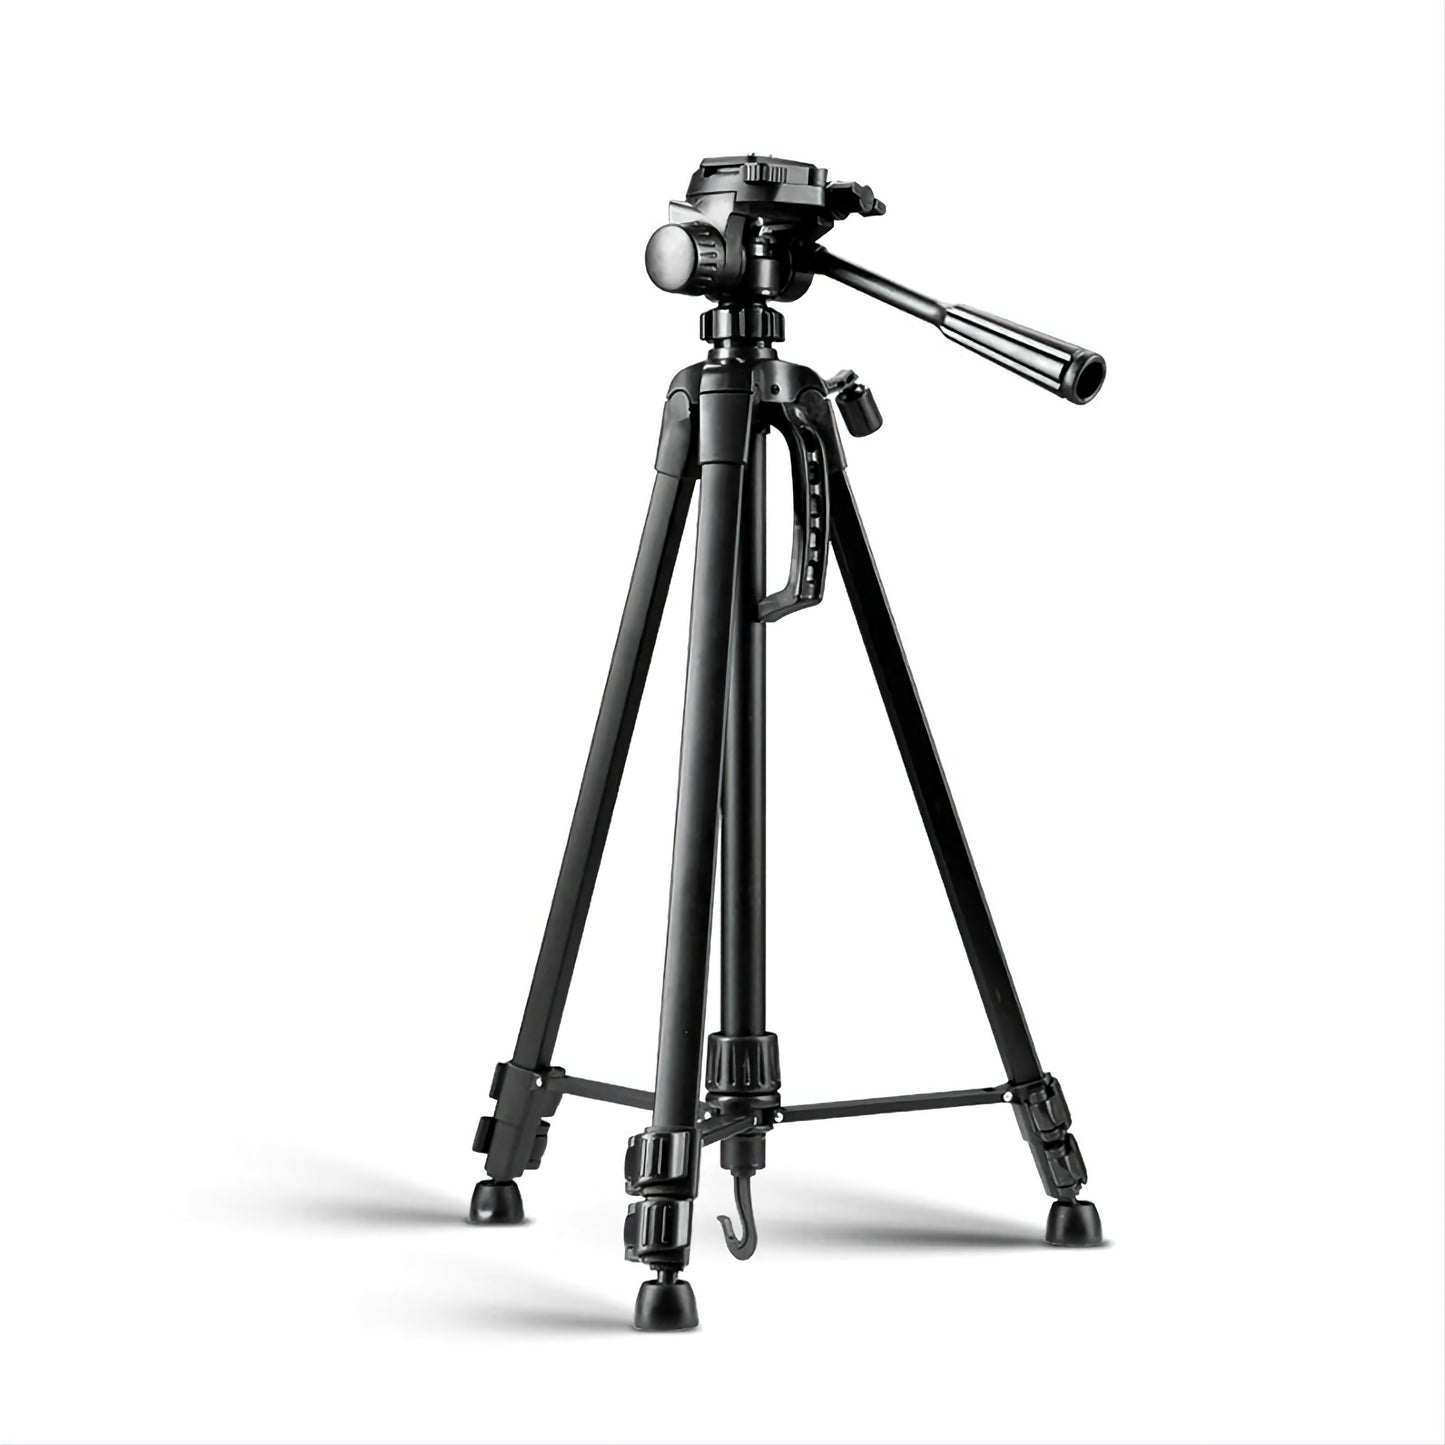 Master the Art of Photography with this Metal Marvel Tripod, Compact & Stylish Black Finish Photography Empowerment Tripod